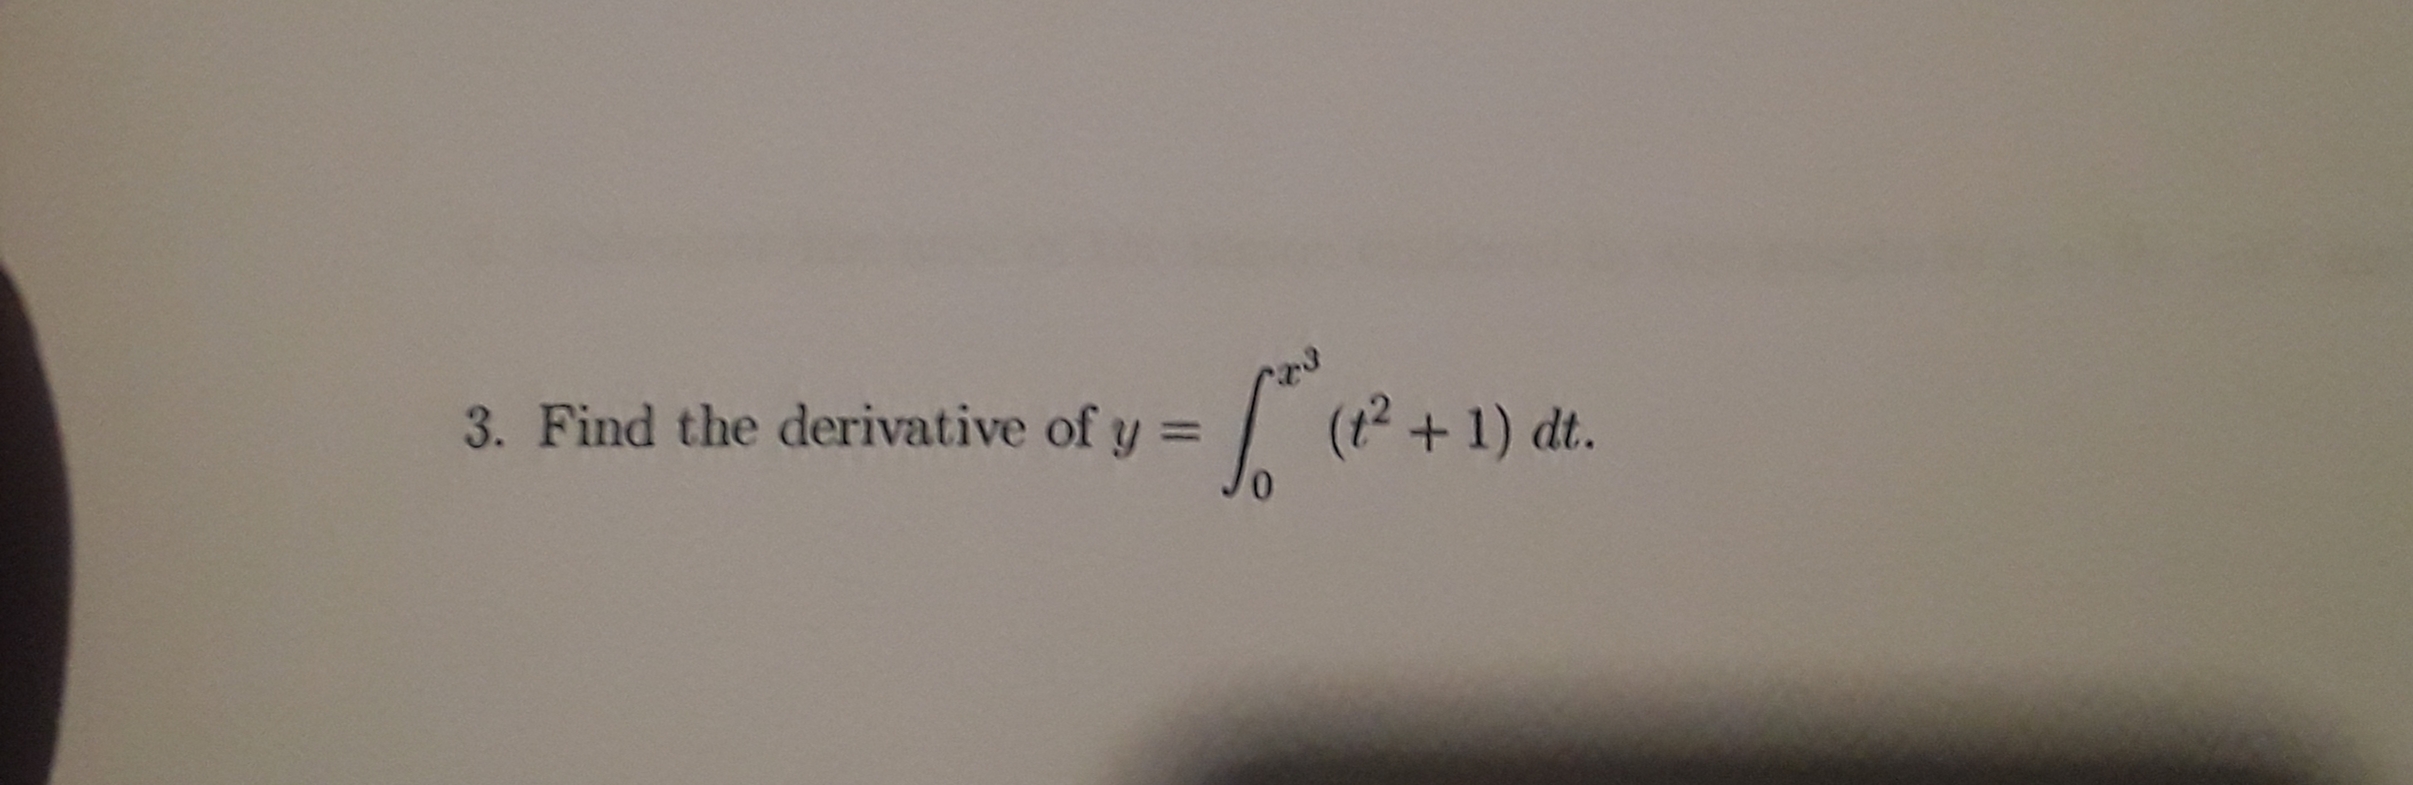 3. Find the derivative of y =
| (12 +1) dt.
